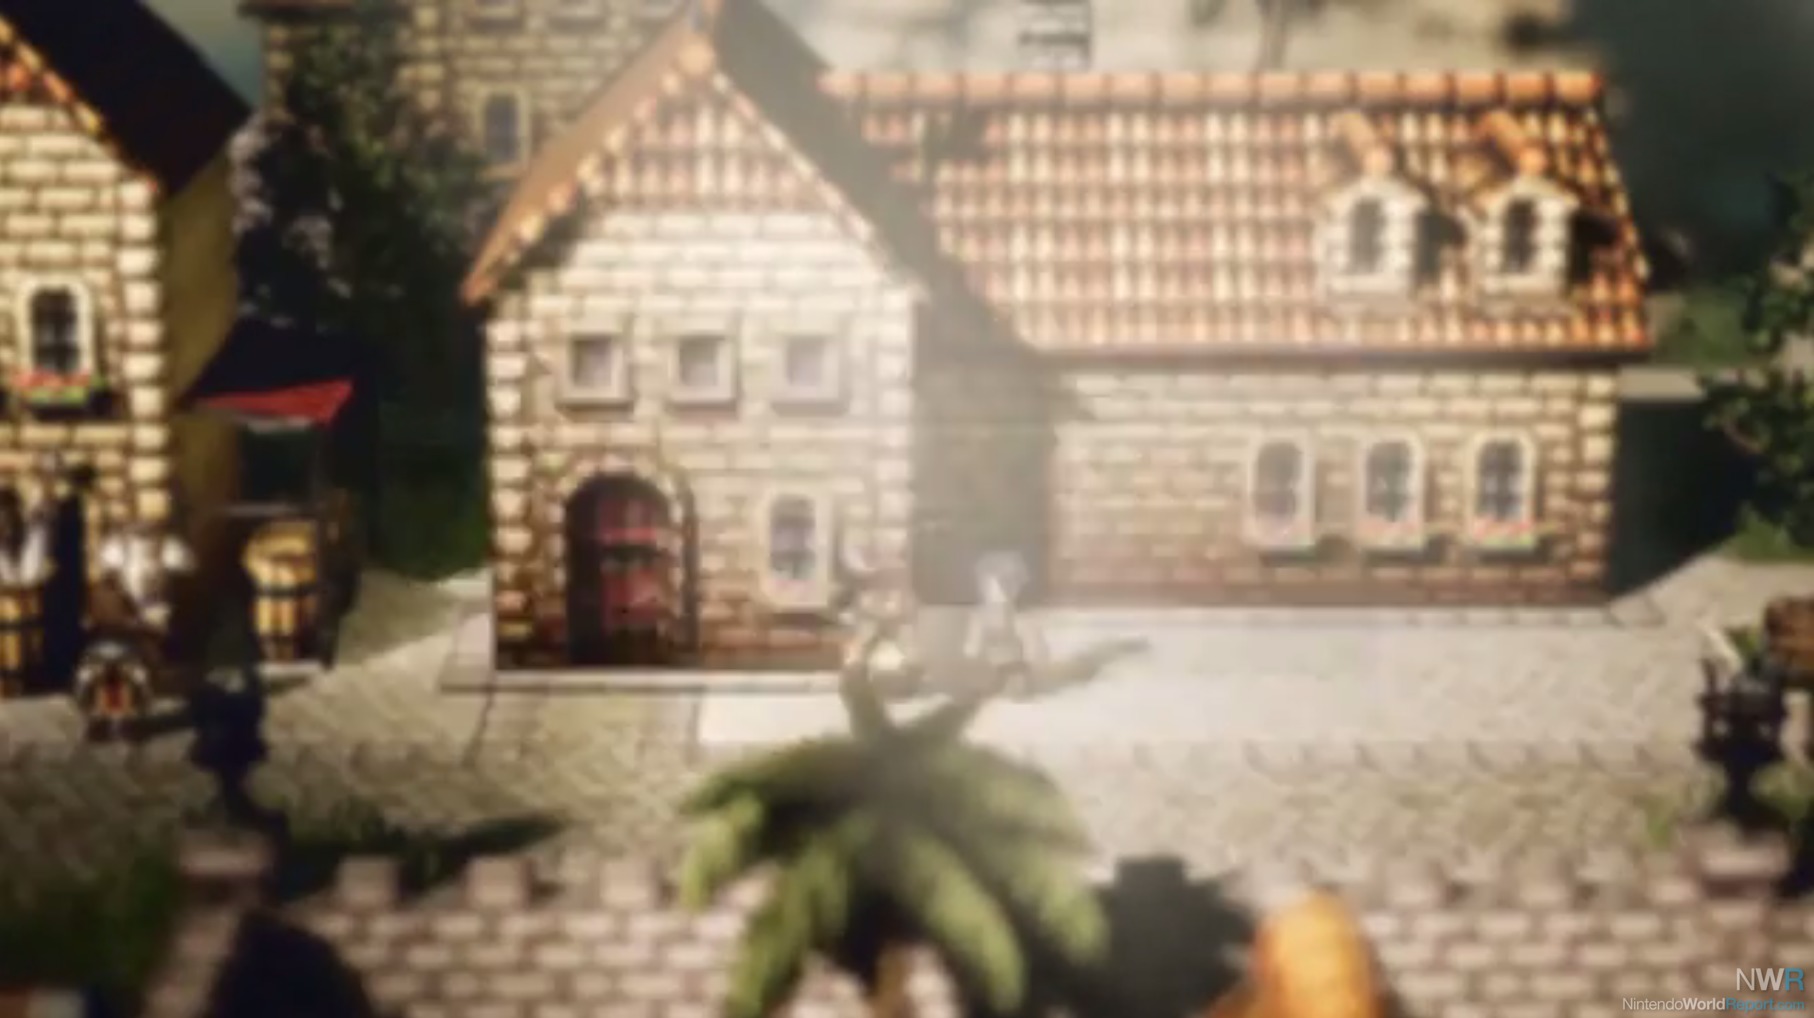 Octopath Traveler launches July 13